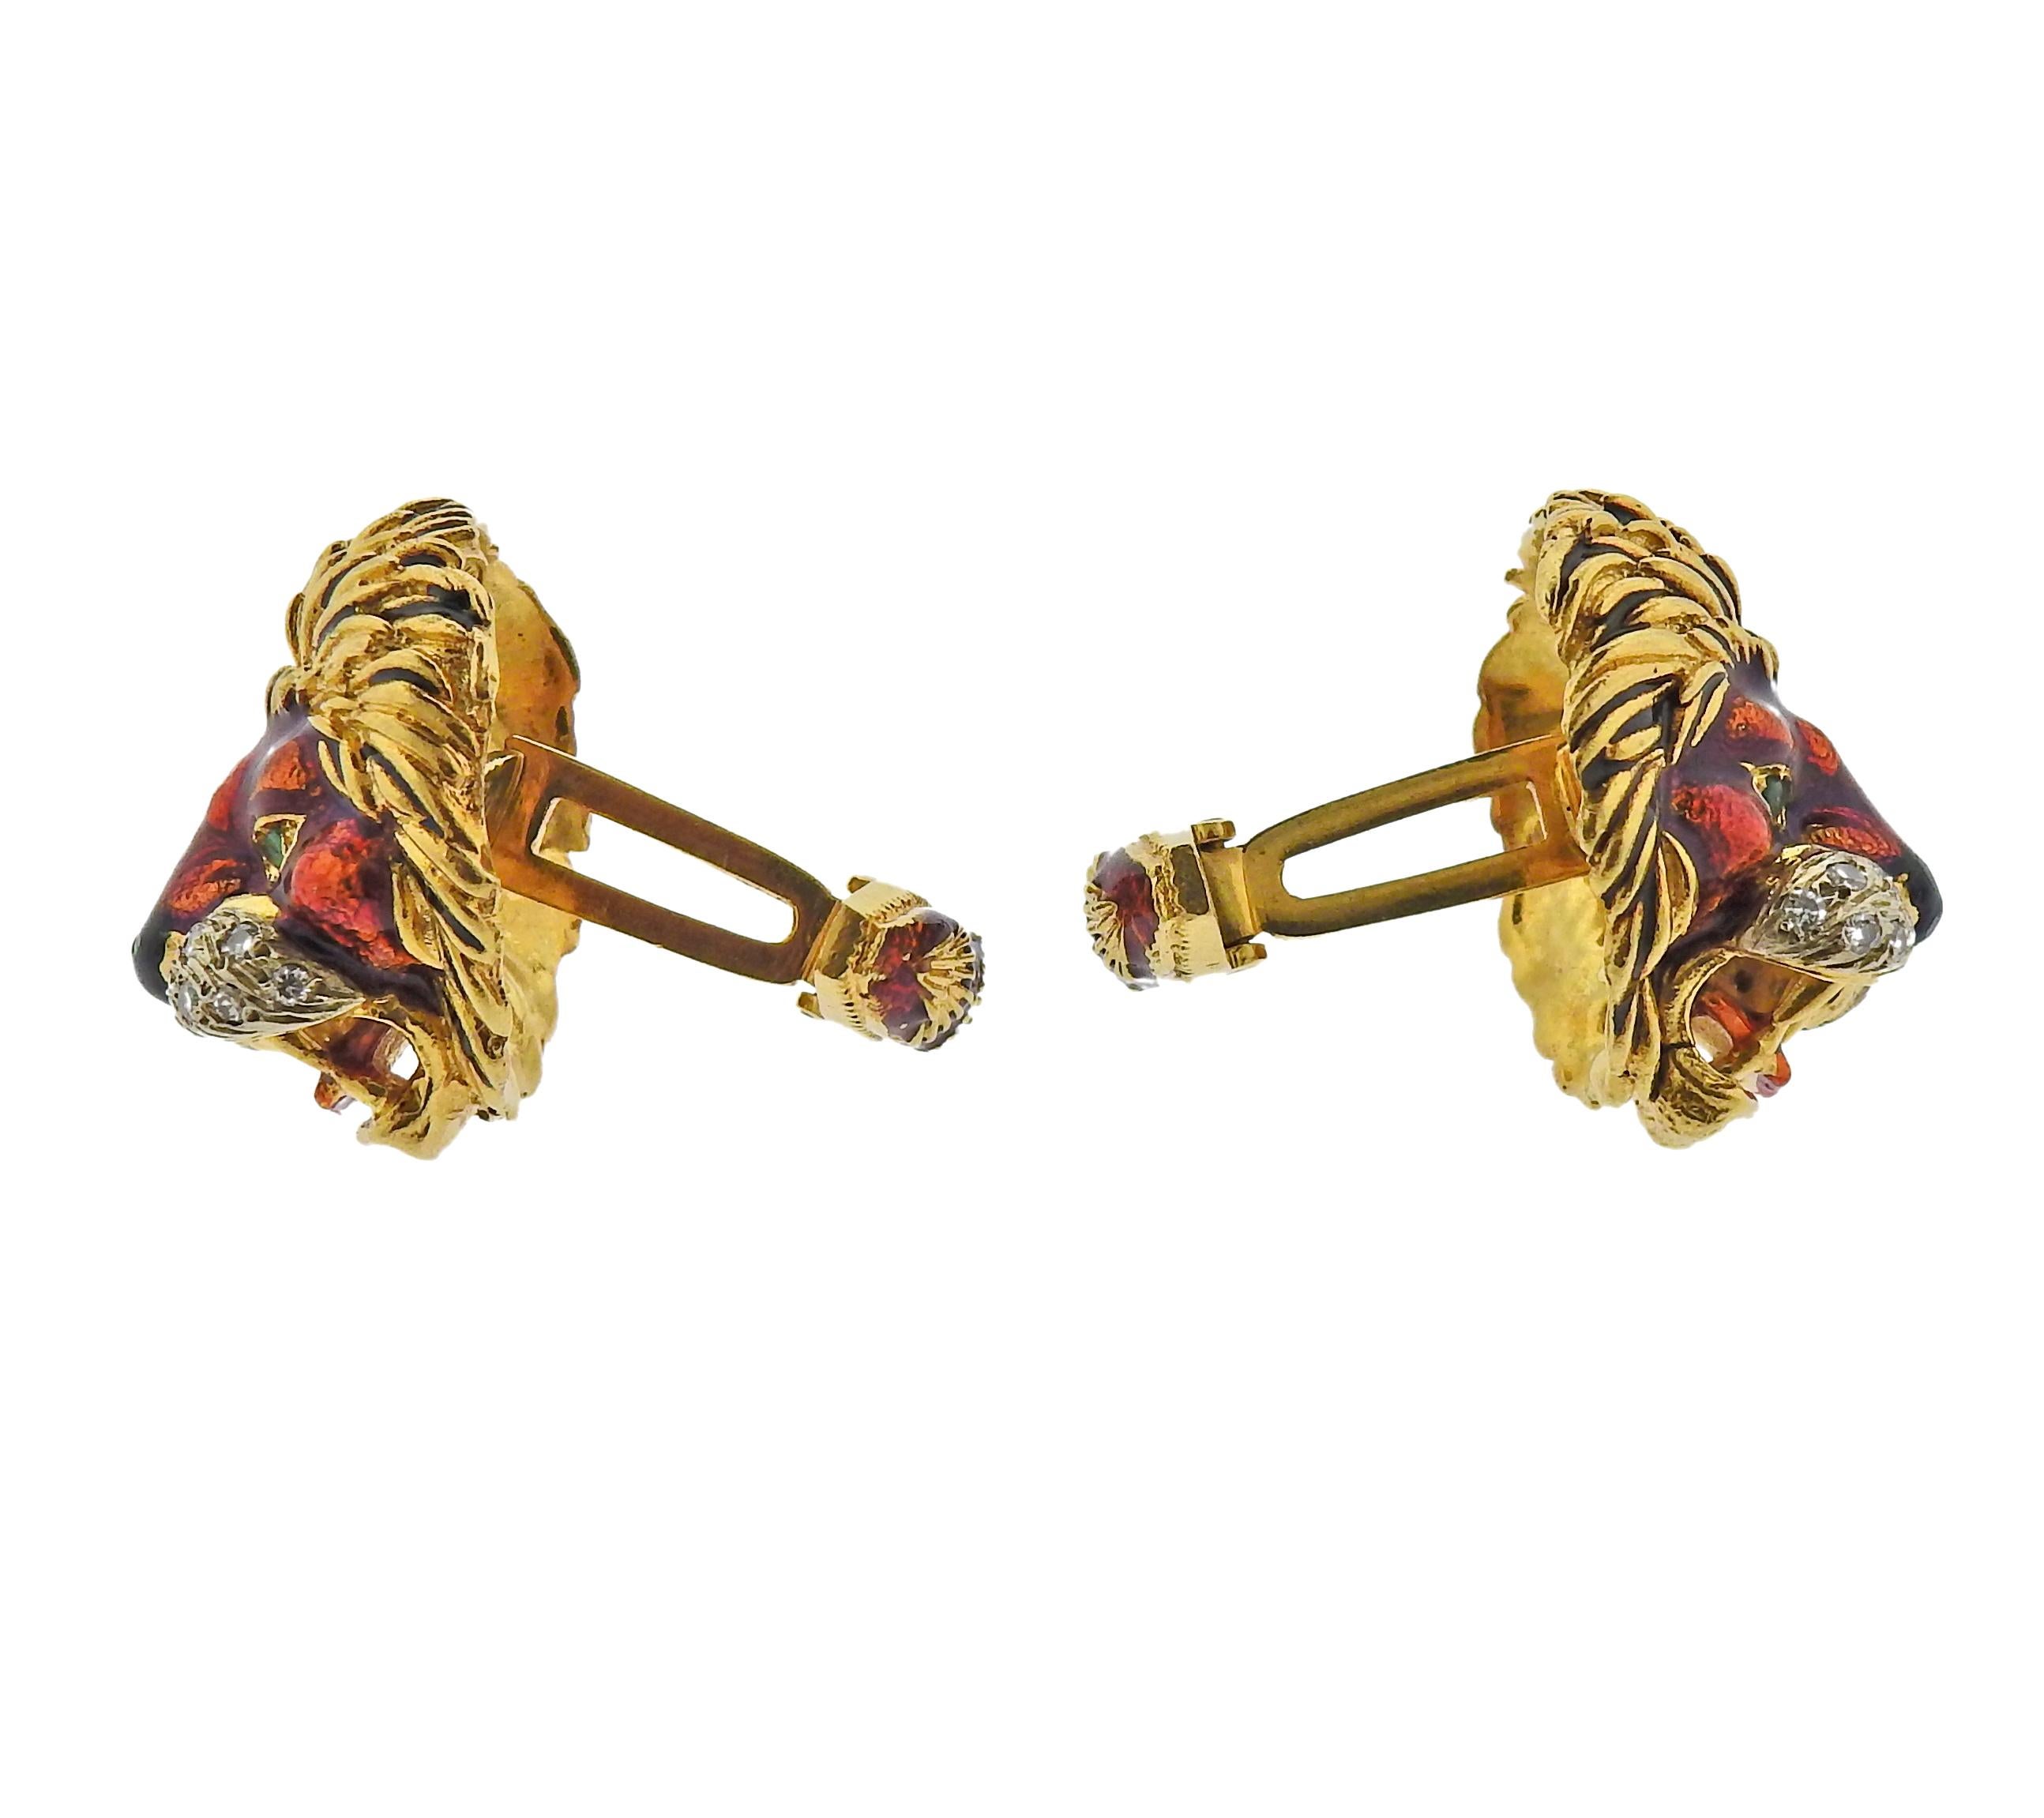 Pair of 18k gold large cufflinks by Frascarolo, with enamel and approx. 0.60ctw in H/VS diamonds, depicting lion heads.  Cufflink top is 25mm x 22mm. Marked: modele depose, FC mark. Weight - 38.6 grams.